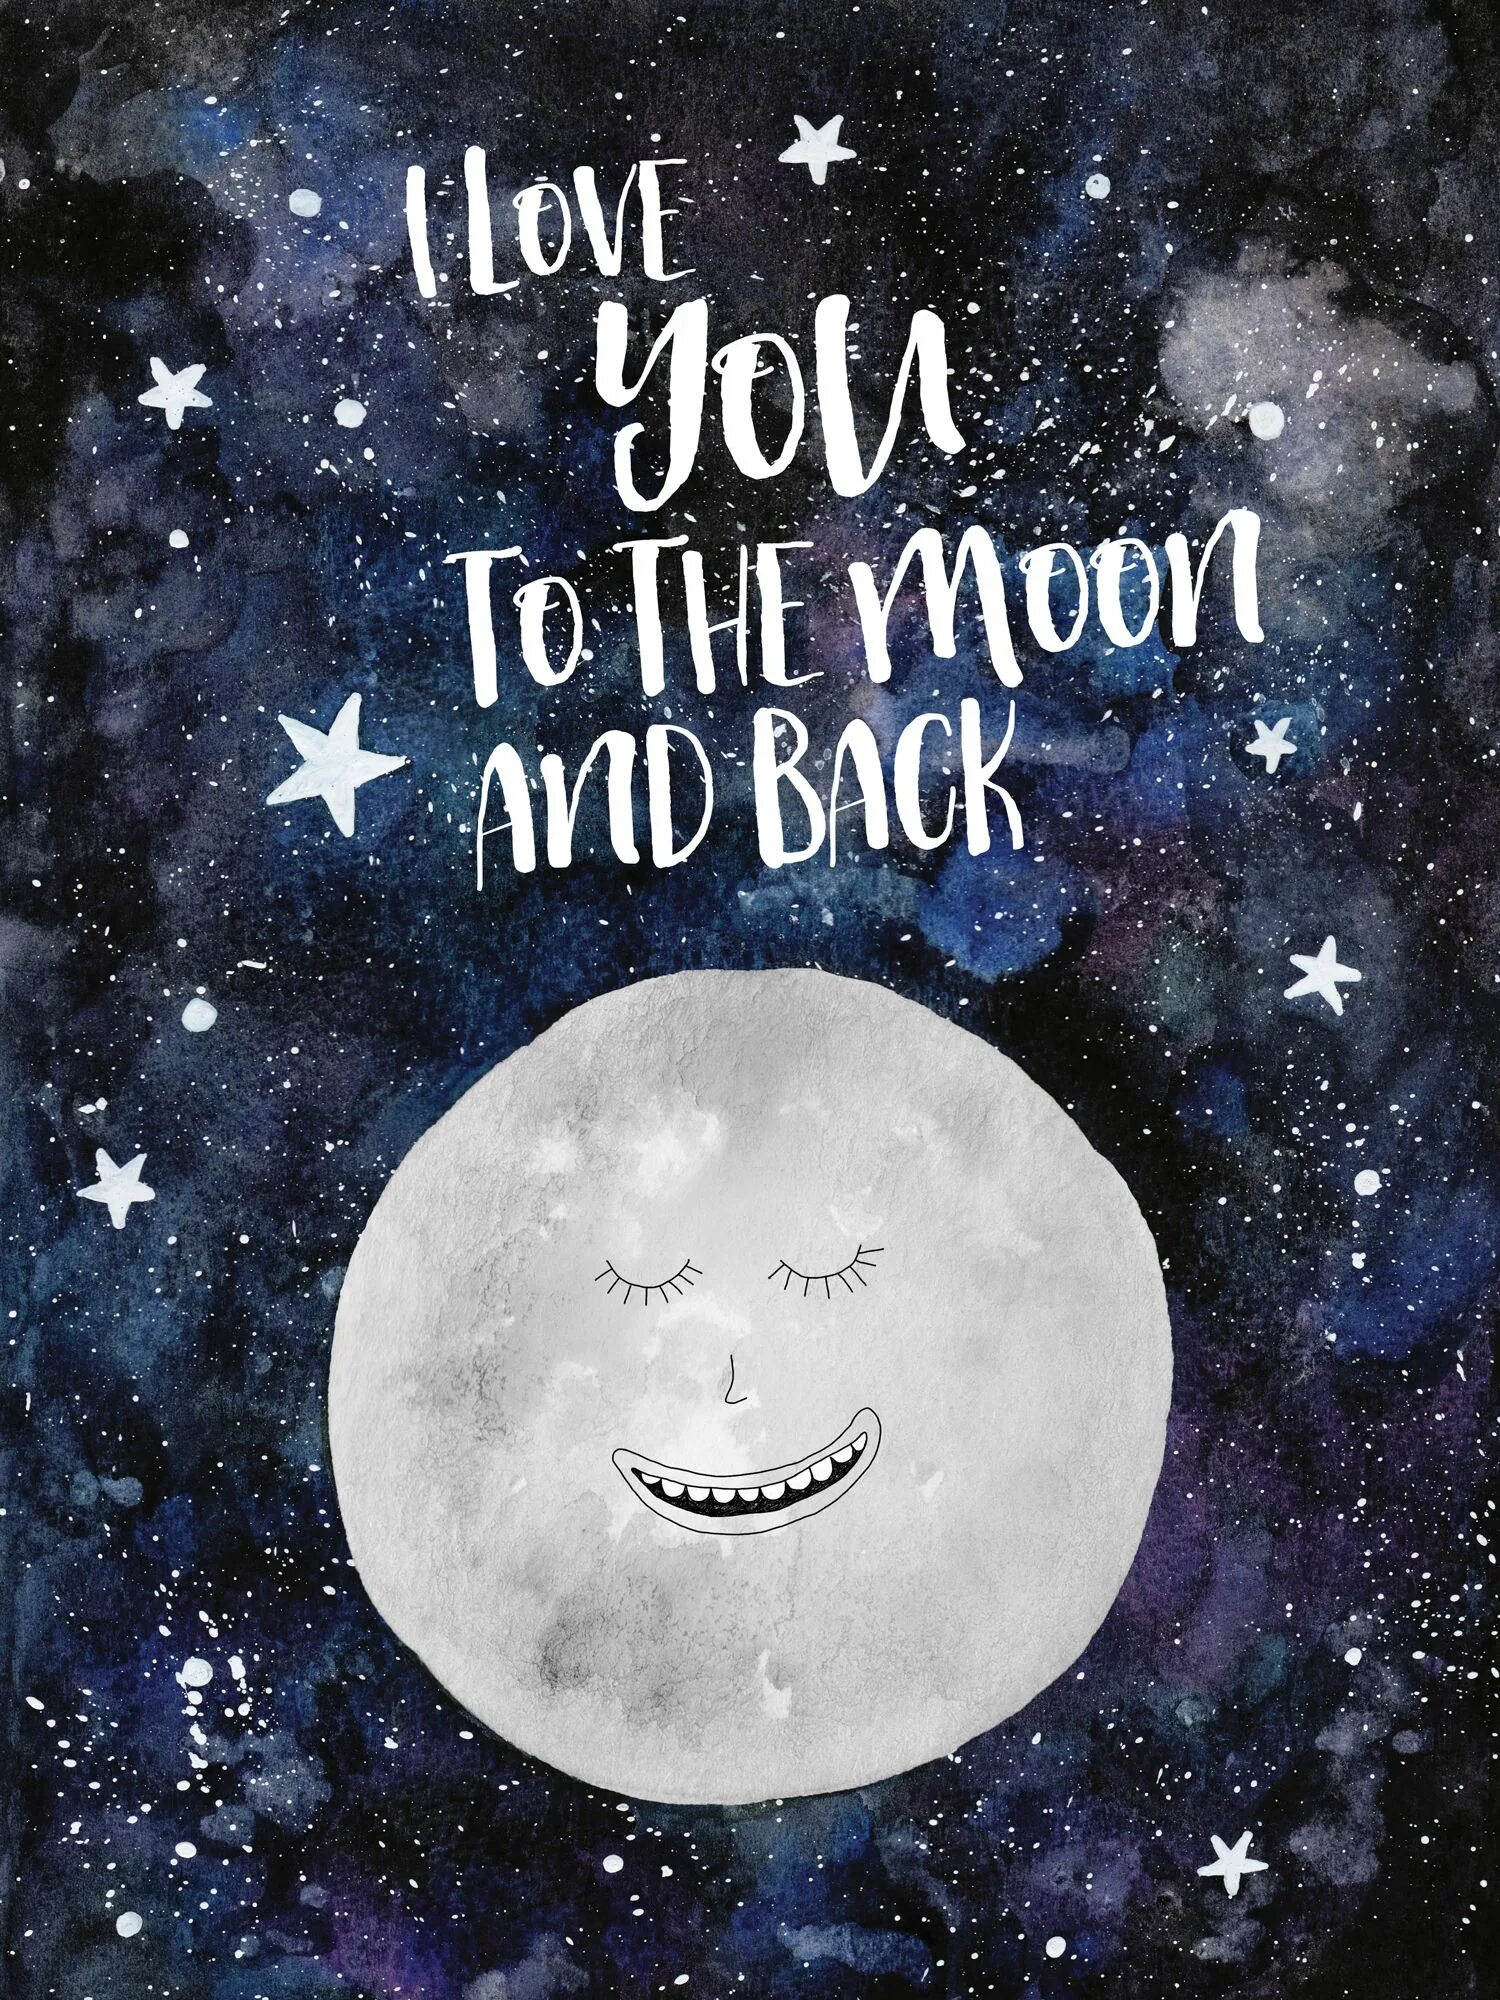 Moon and back. Love you to the Moon and back. To the Moon рисунок. Love you to the moon